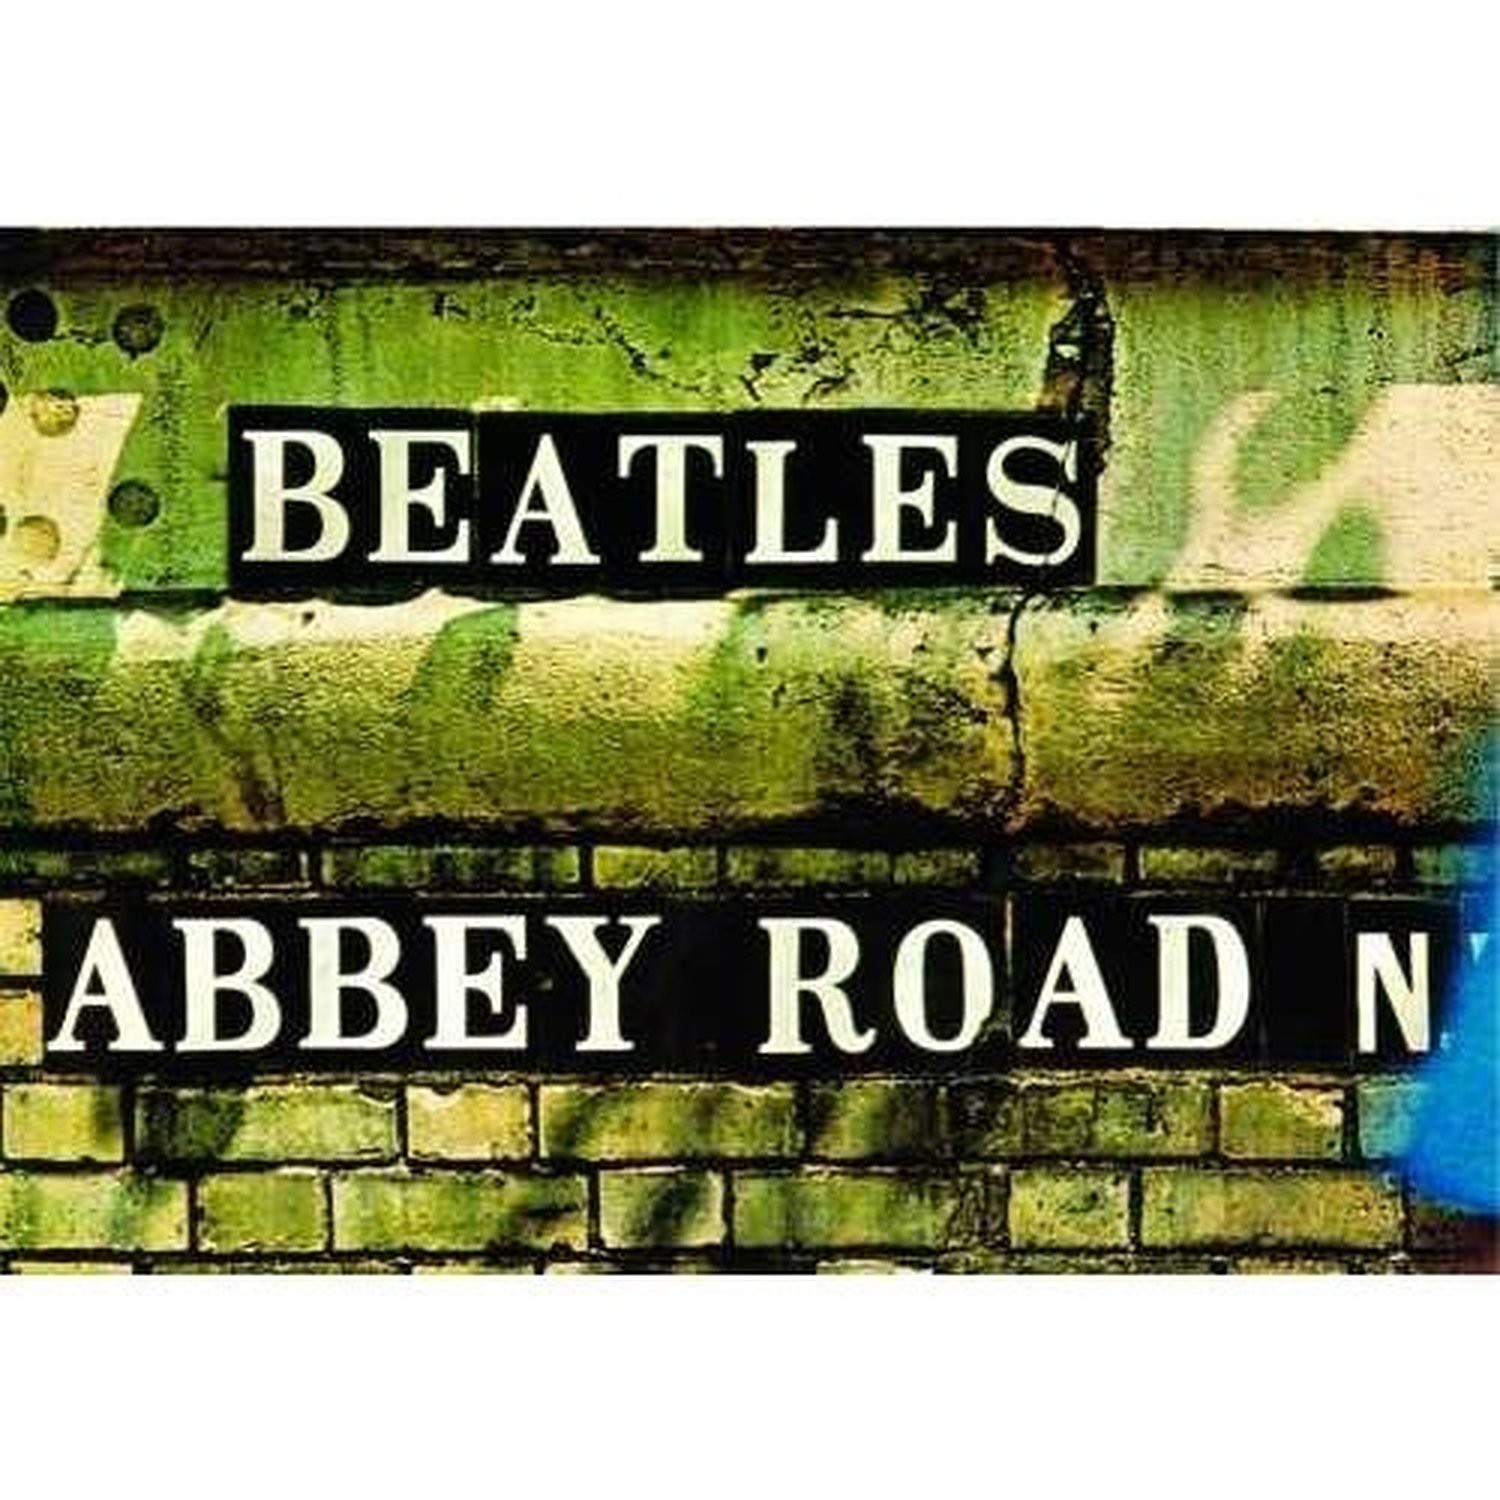 The Beatles Abbey Road Sign Postcard Gift Fan 100% Genuine Official Merchandise